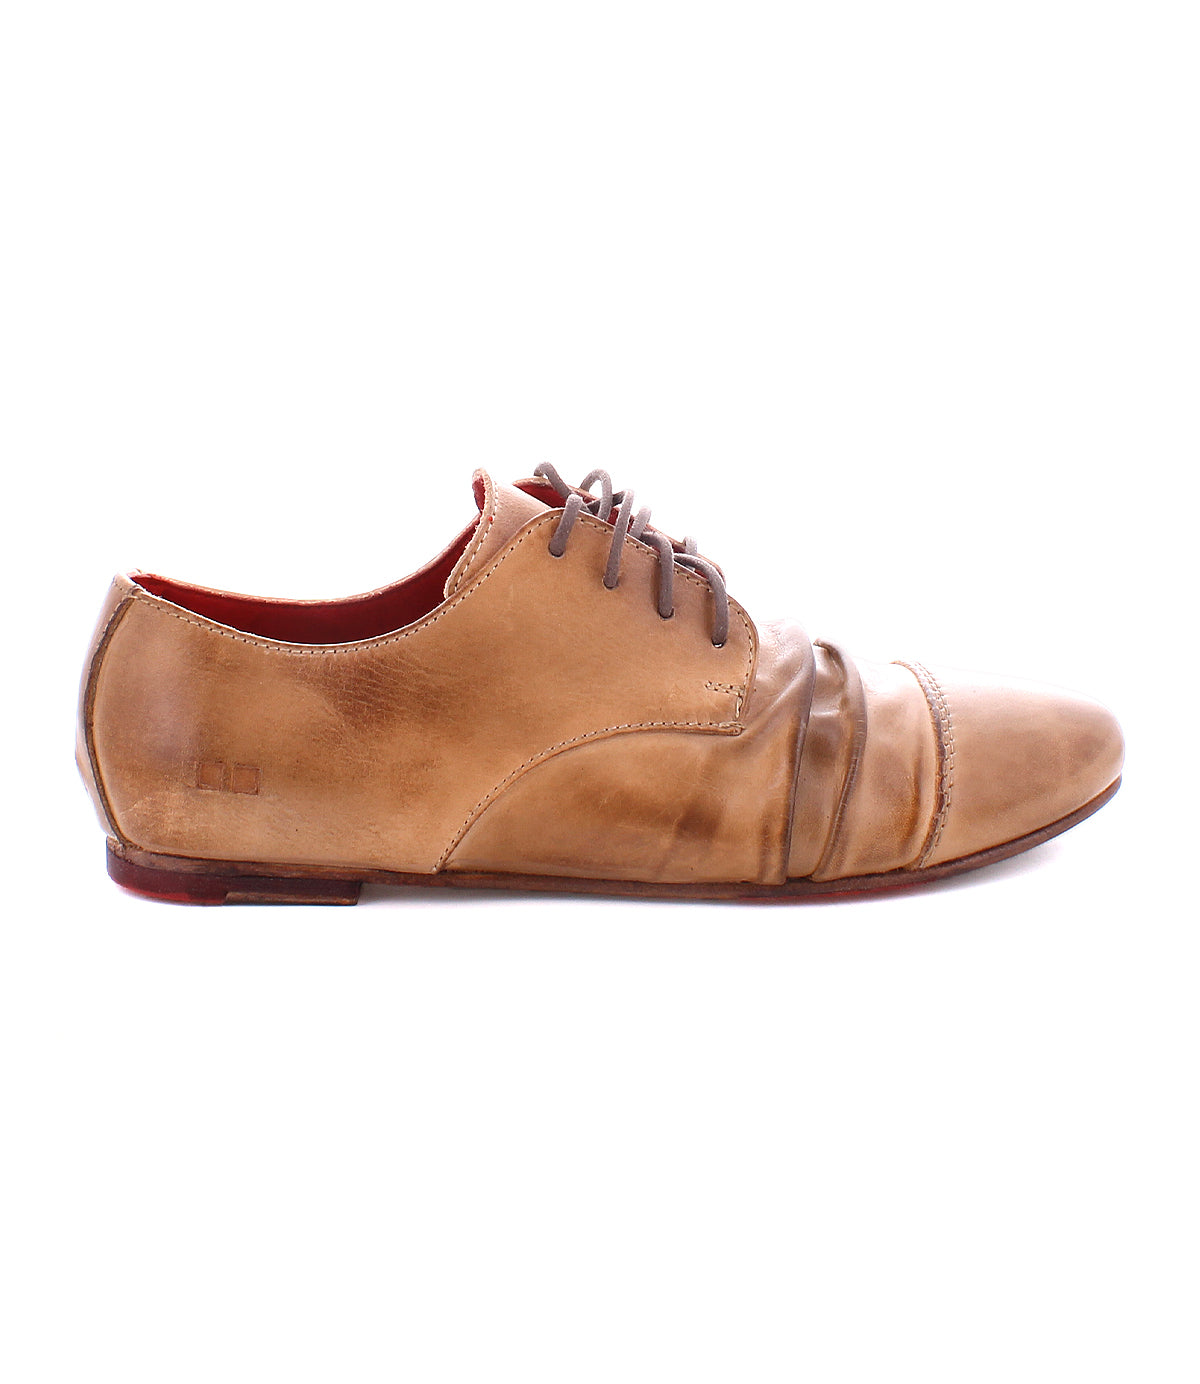 Side view of a brown leather lace-up **Bed Stu Rumba II** shoe with visible scuff marks and wear, featuring a slightly pointed toe and low heel, exuding 1920s wingtip flair.
